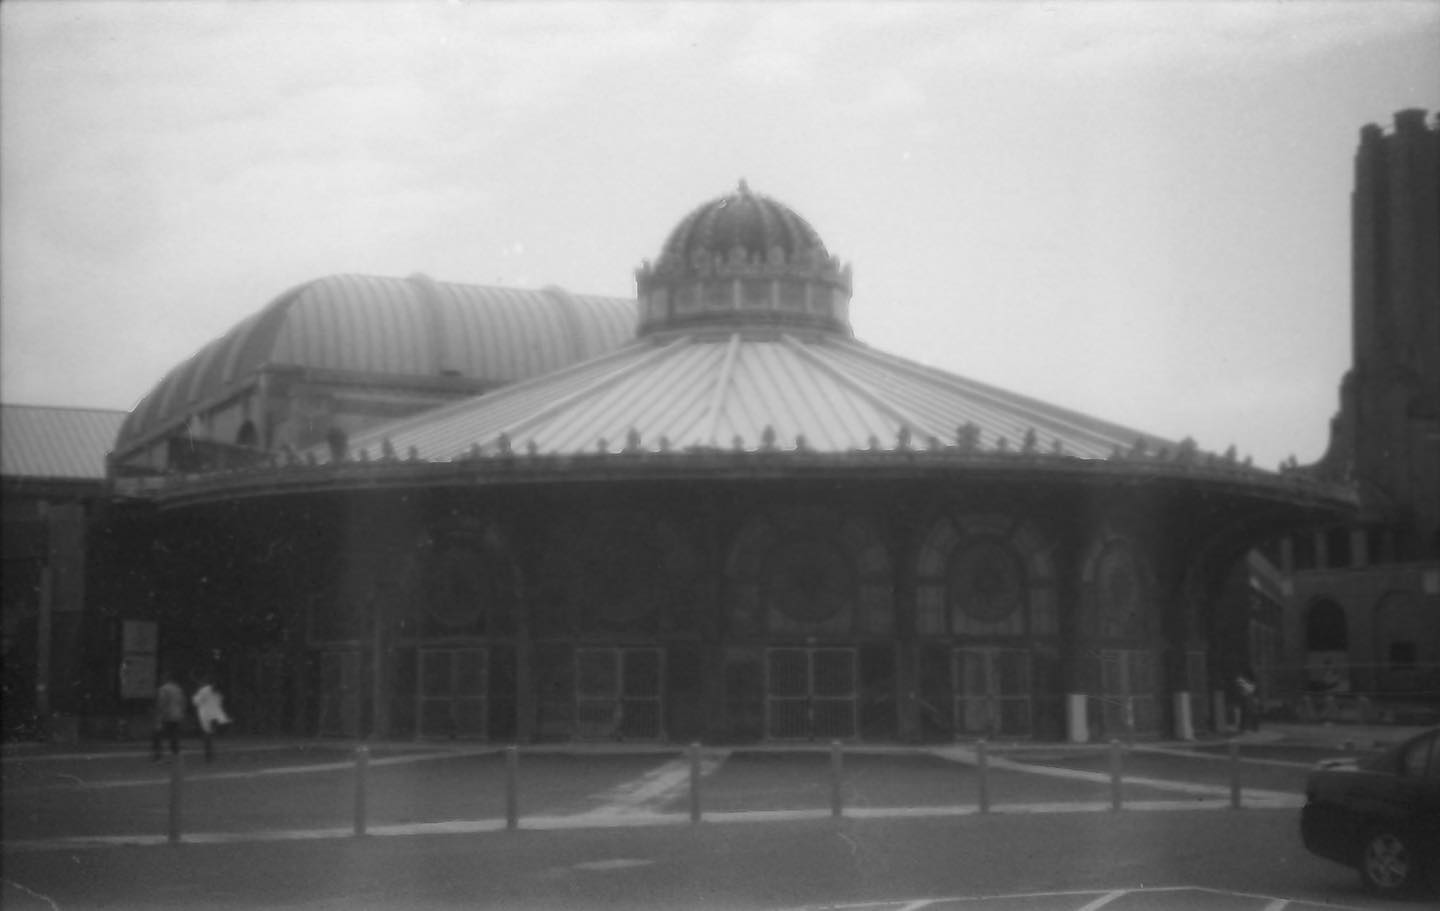 Carousel

Another shot from the #contaxiiia on Eastman No. 10, expired in 1931 (90+ years old). #film #filmphotography #allthroughalenspodcast #staybrokeshootfilm #expiredfilm